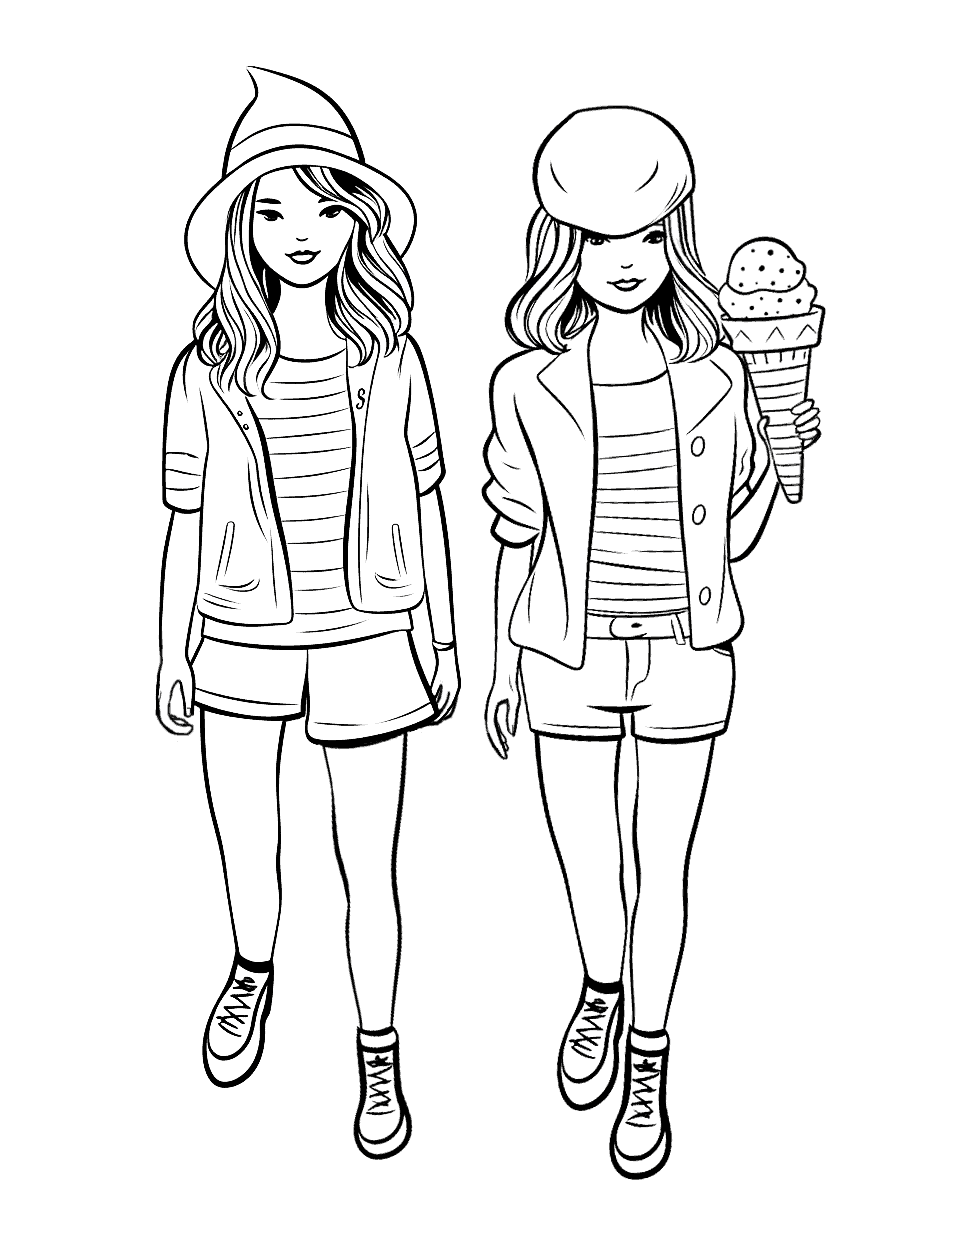 Ice Cream Fashion Show Coloring Page - Models showcasing ice cream-inspired outfits.